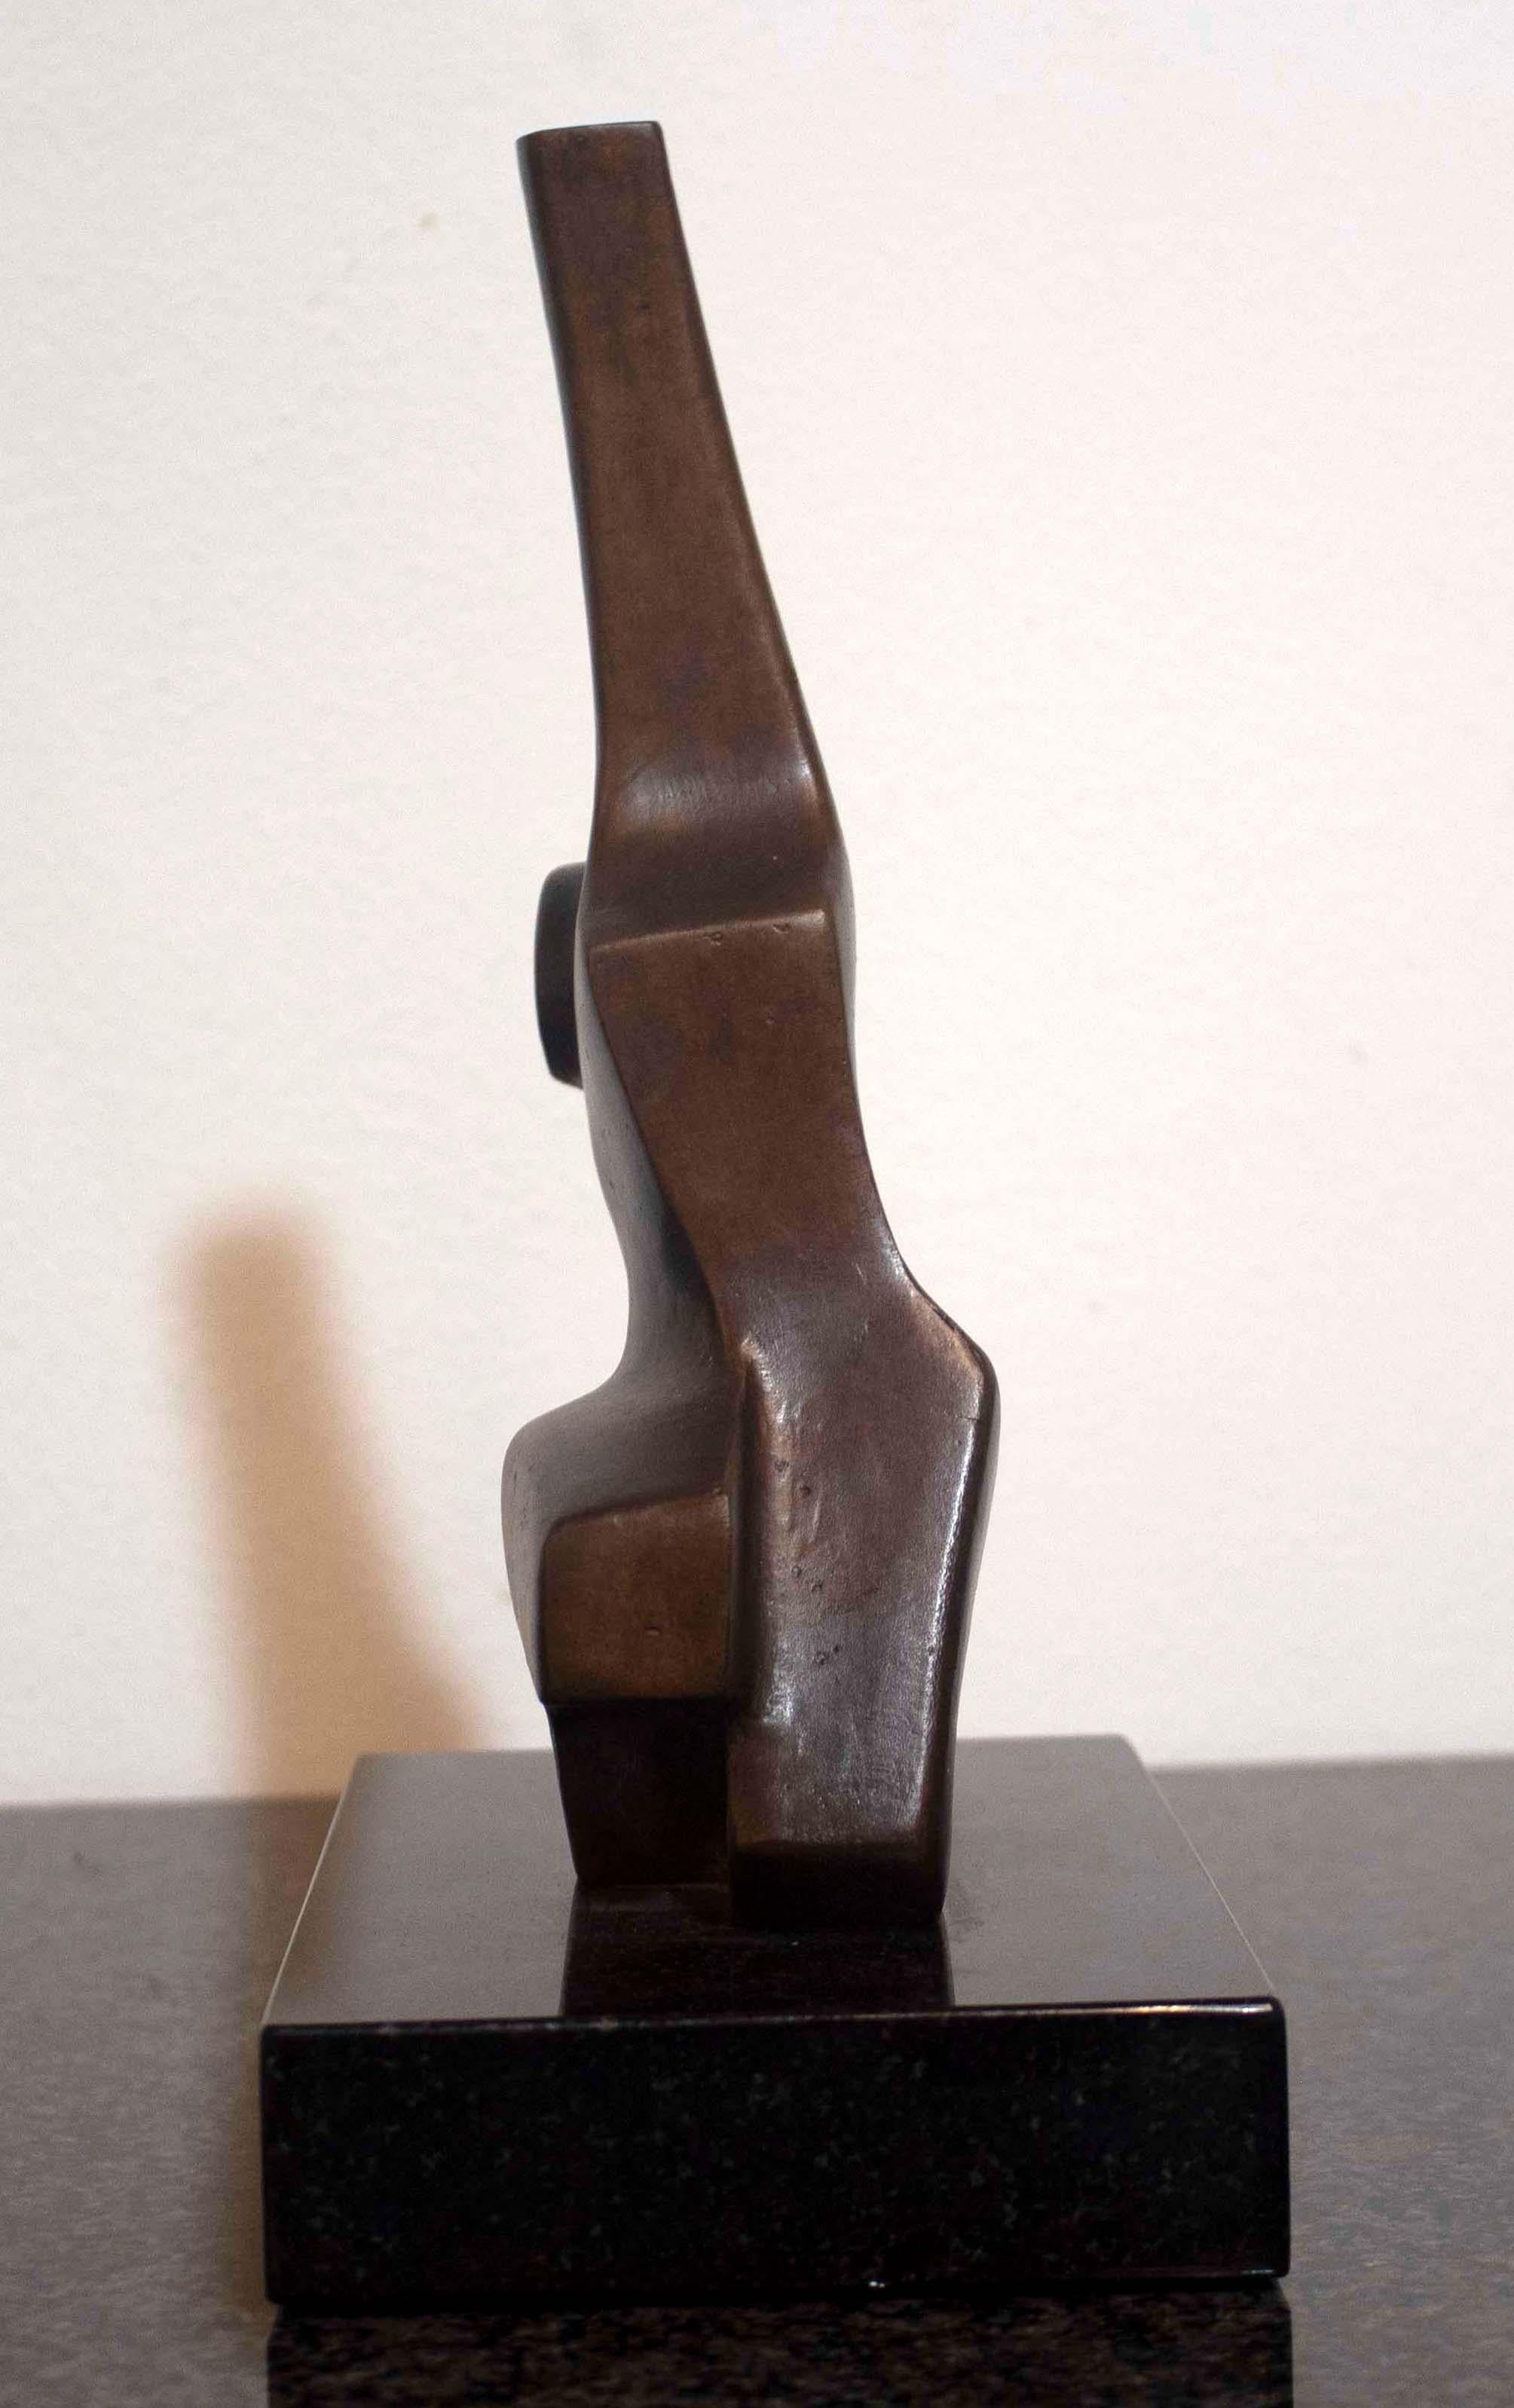 For your consideration is a gorgeous, abstract table sculpture, made of metal on a marble base, signed Varga, circa the 1970s. In excellent vintage condition. The dimensions are 7.25